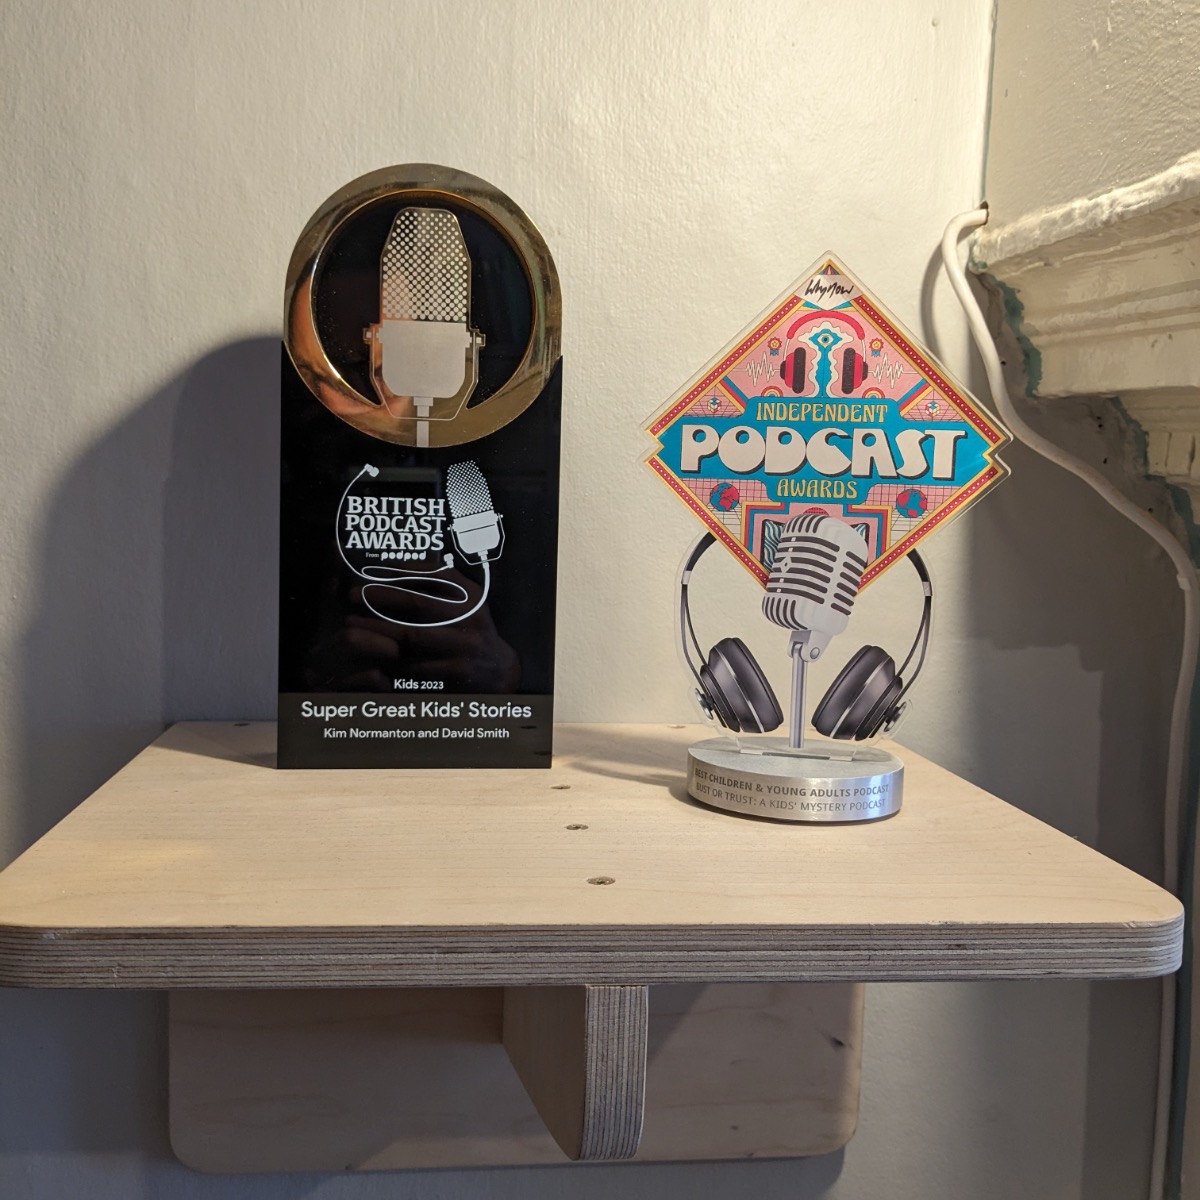 Two awards for our Original Podcasts